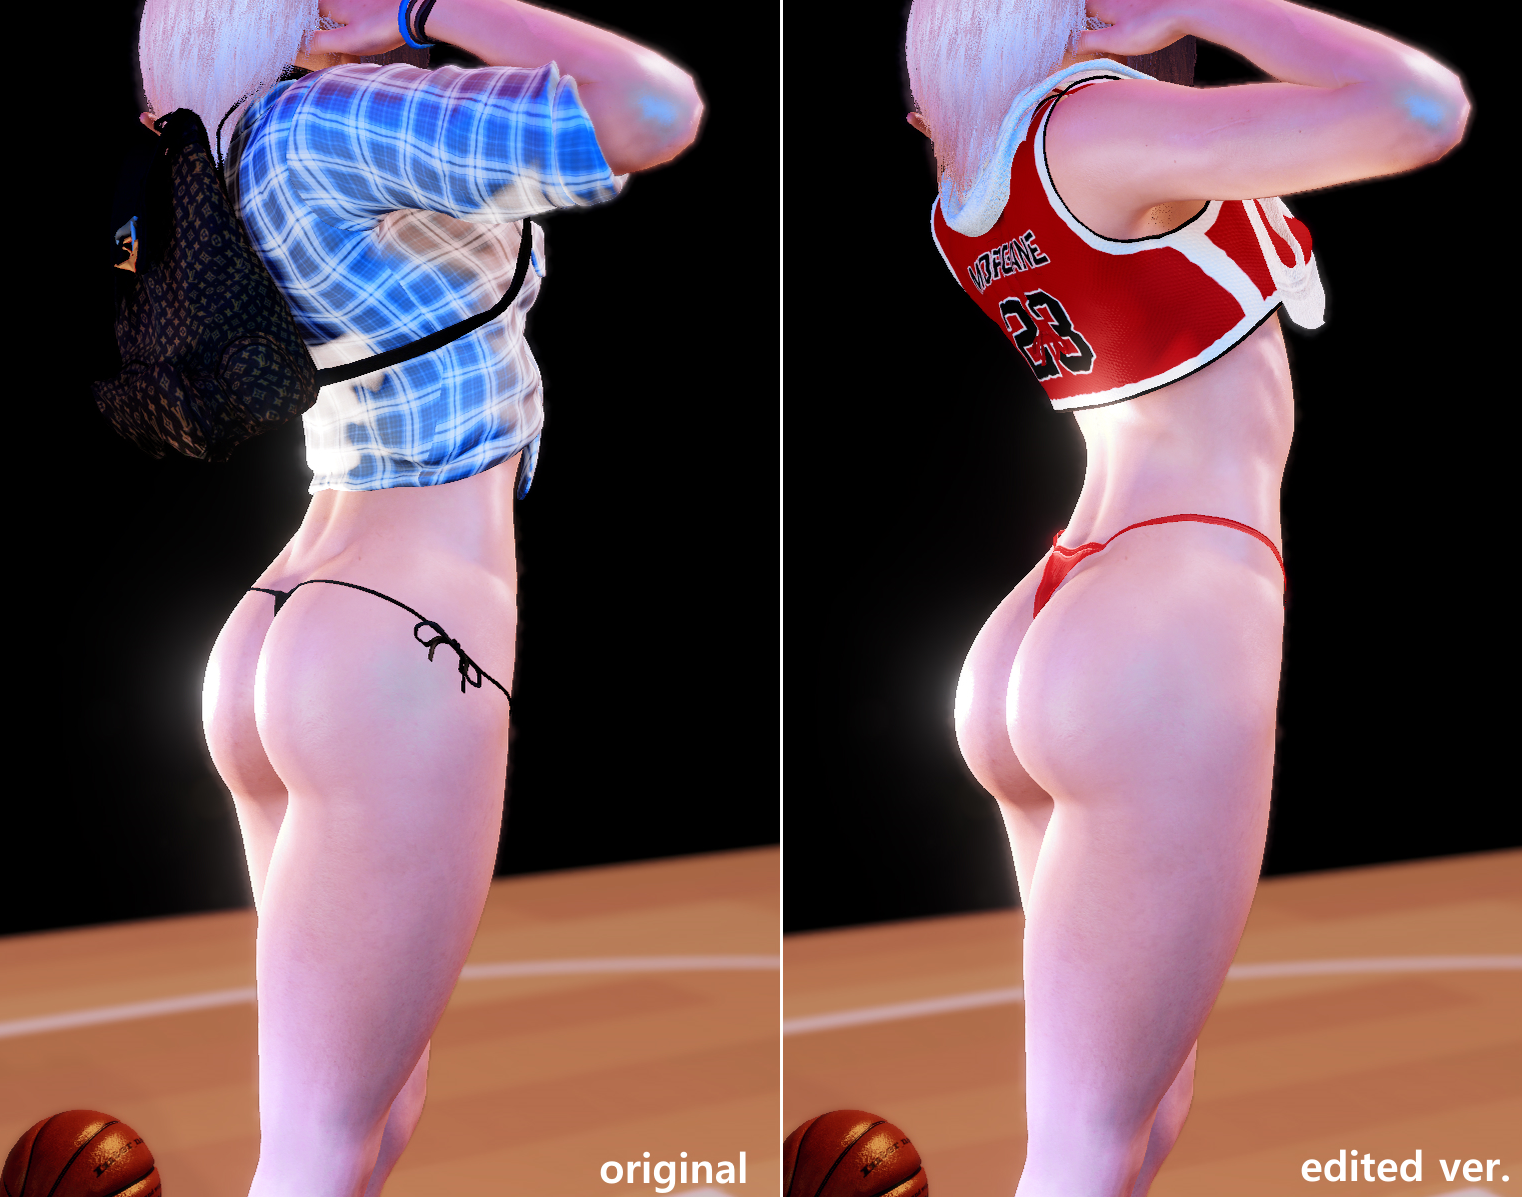 morgane glutes update.png